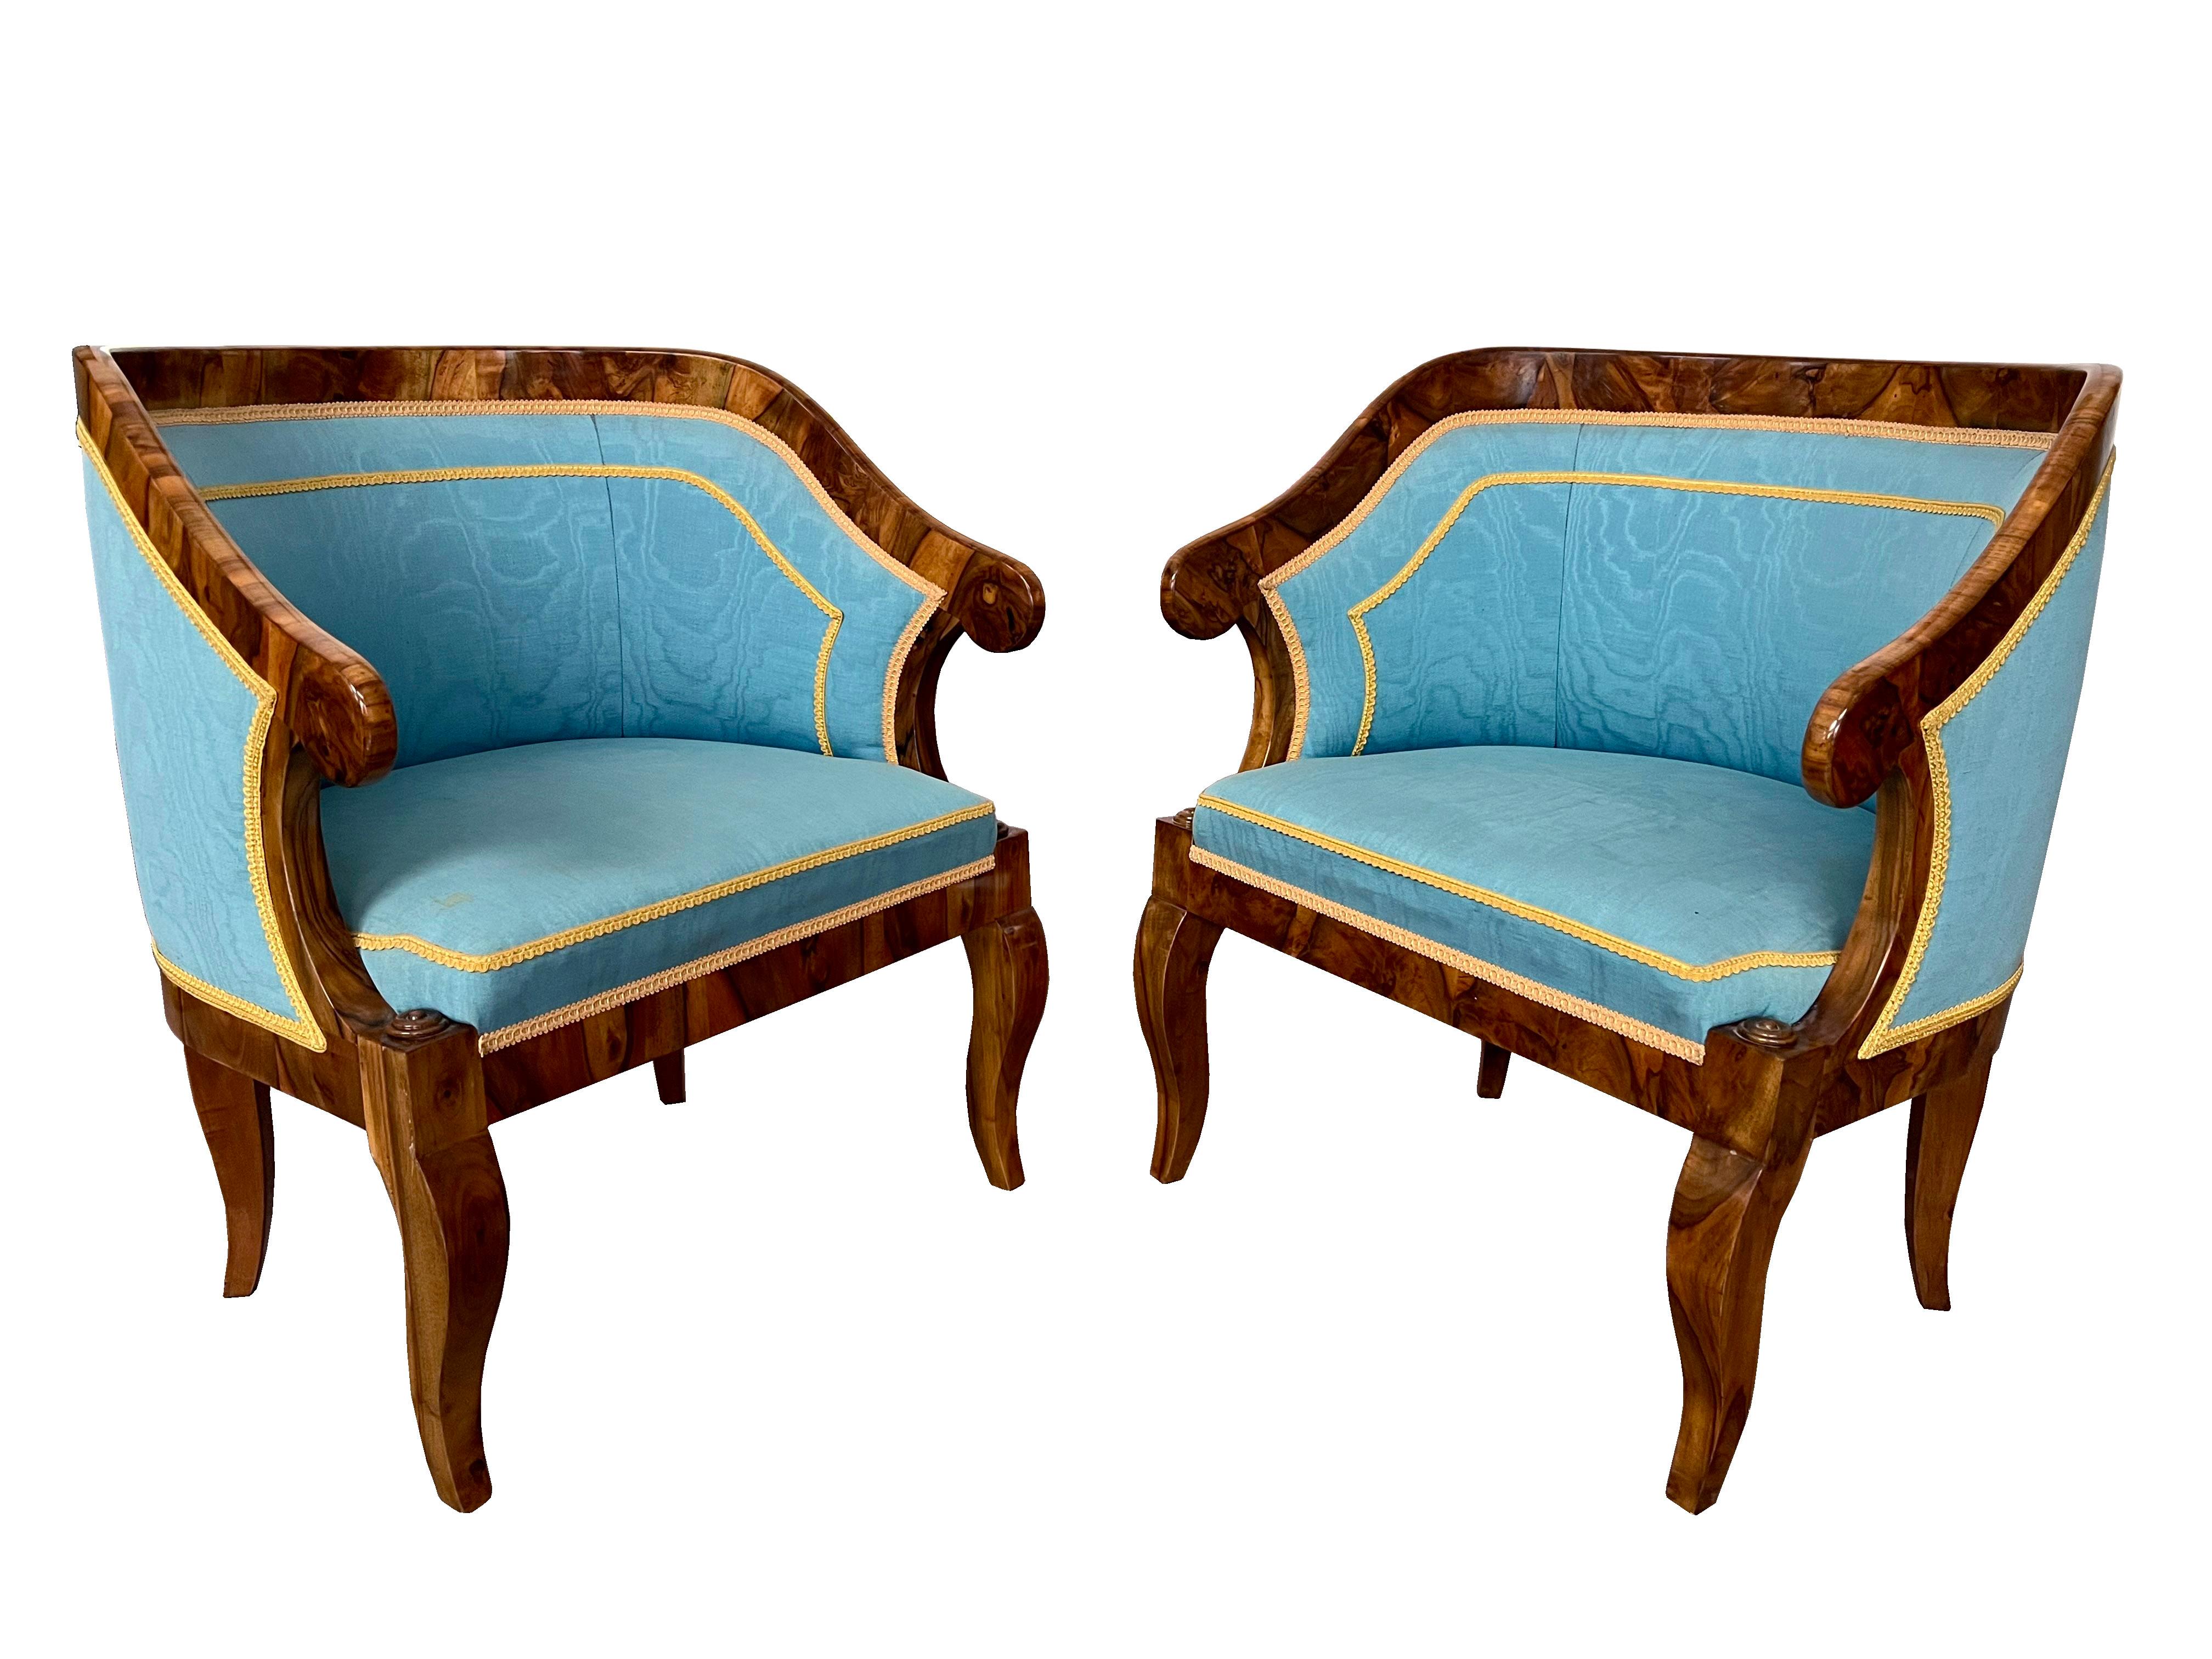 Hello,
This exceptional pair of Viennese upholstered Biedermeier bergeres from c. 1825 are distinguished by their sophisticated proportions, rare and refined design and excellent craftsmanship and continue to have a great influence on modern